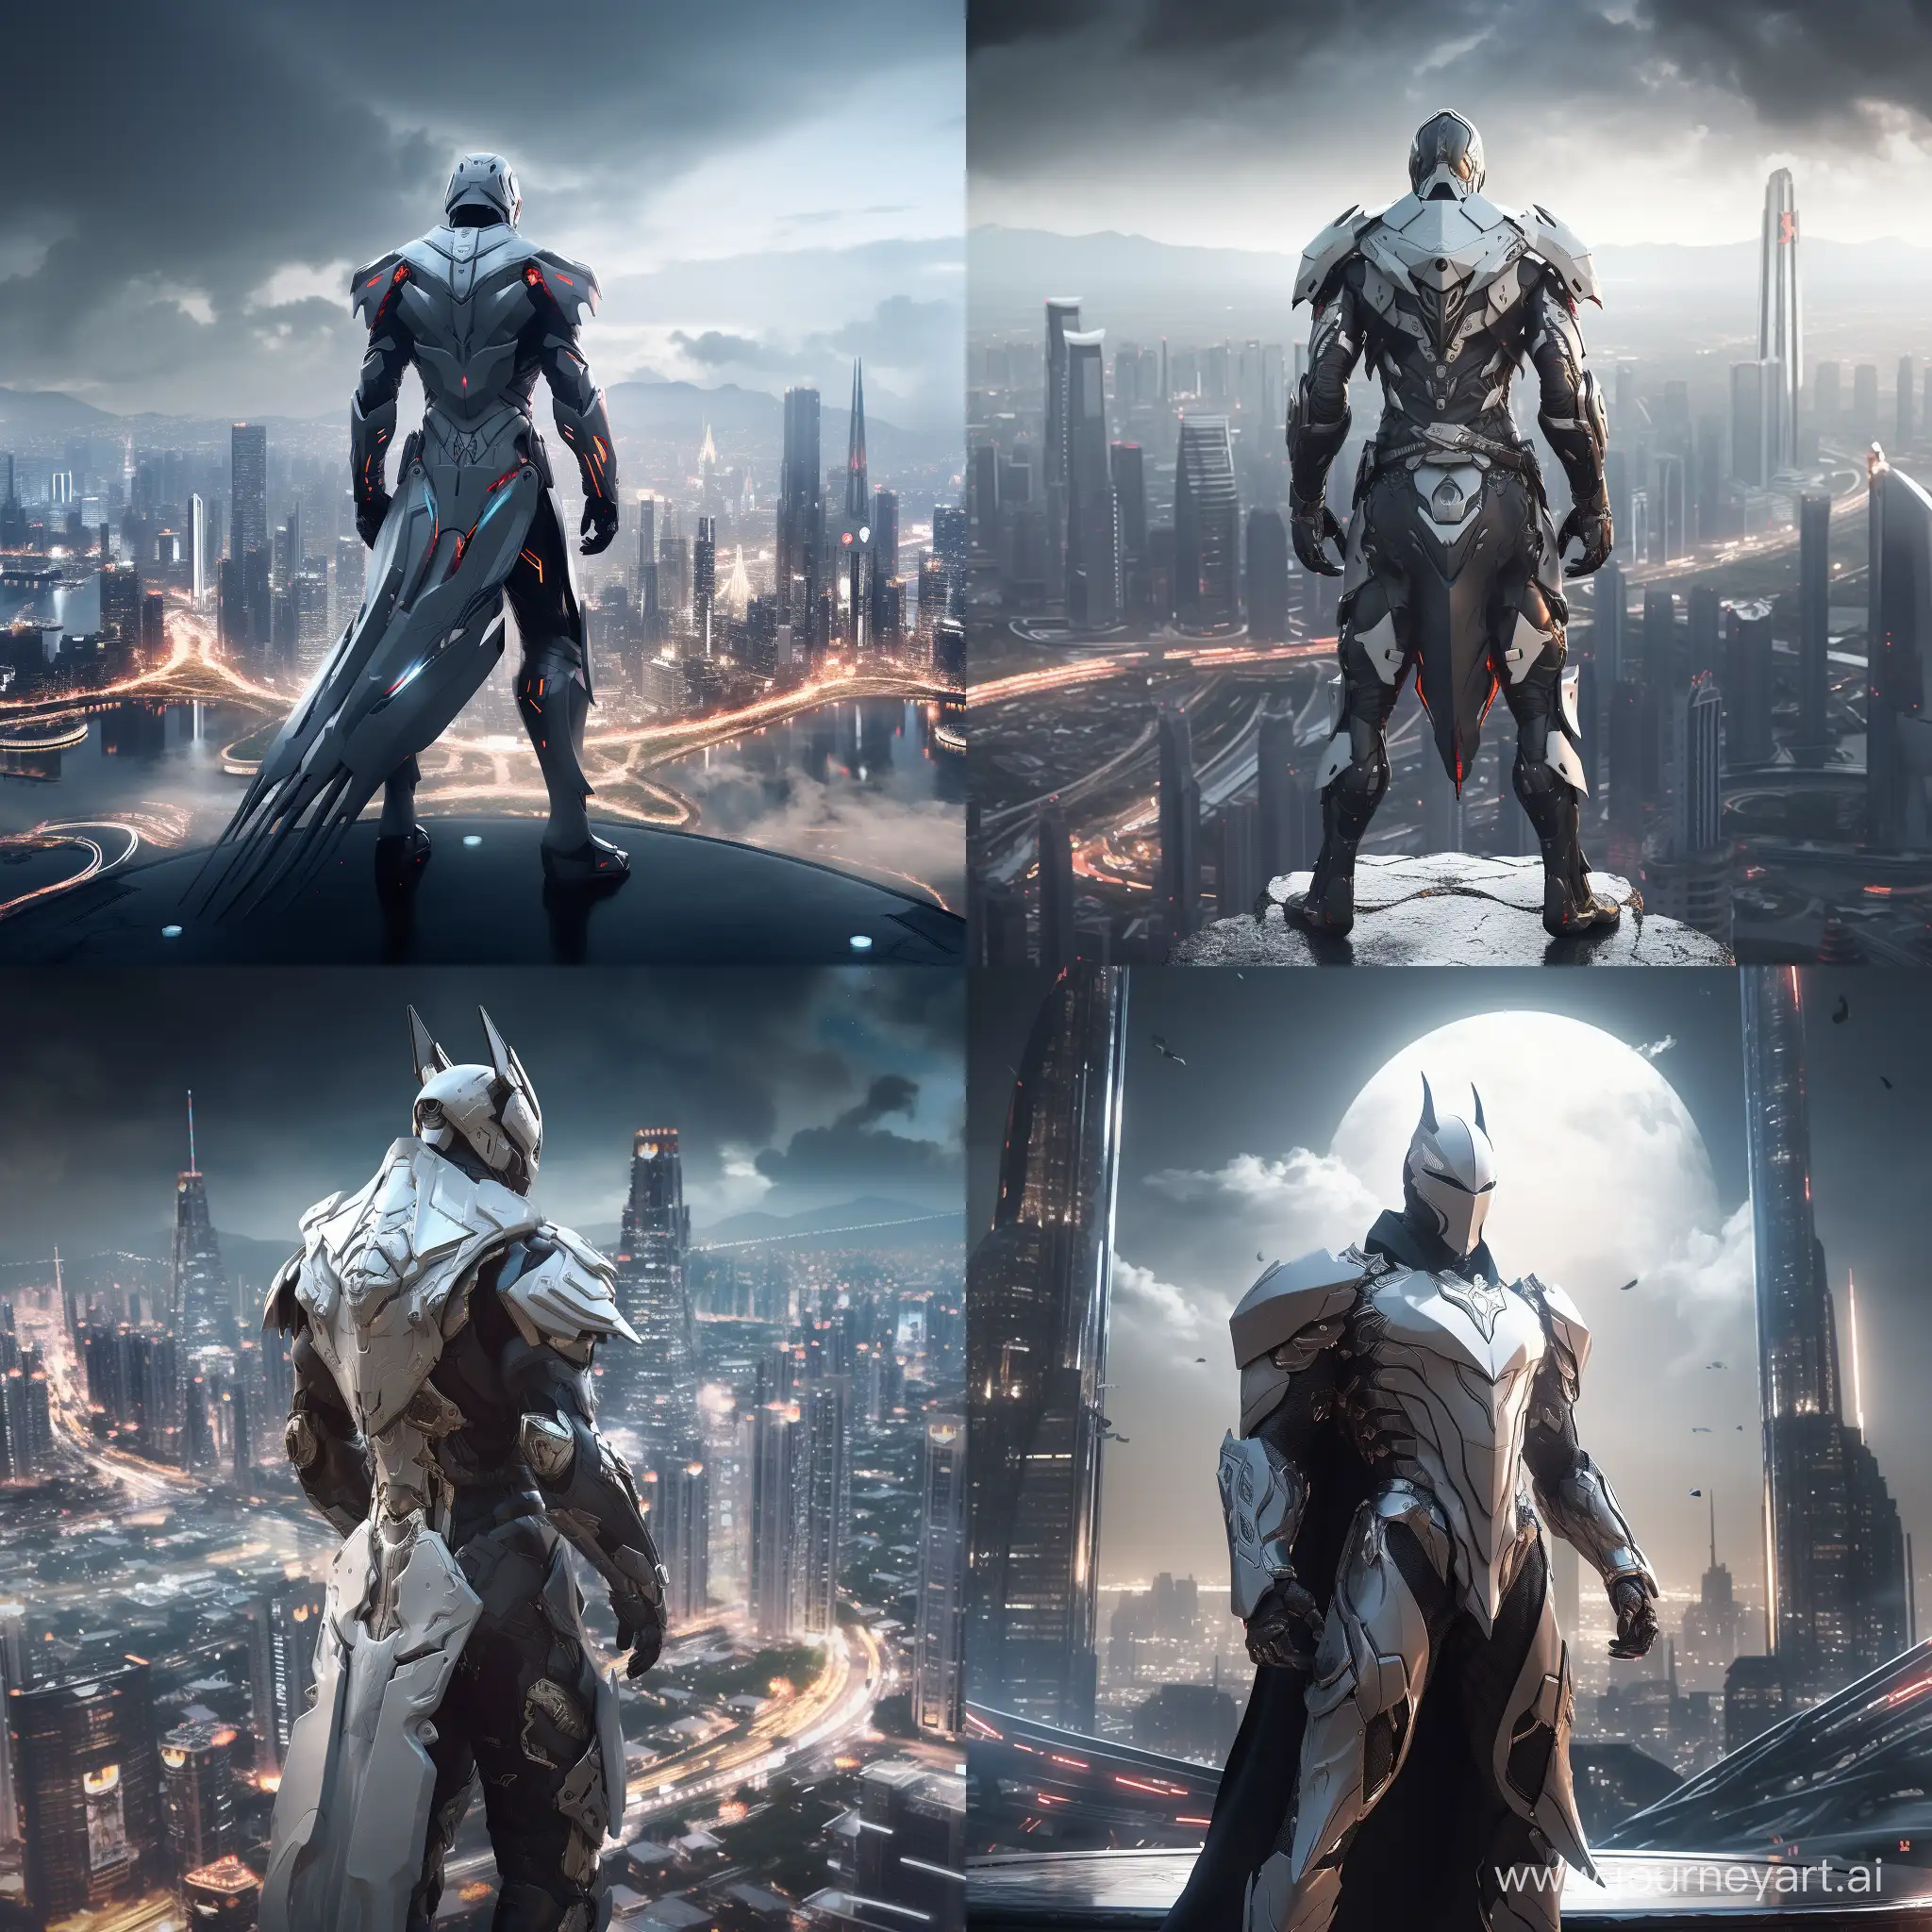 a futuristic white dark knight standing in front of a futuristic city, concept art by Zhang Han, cgsociety contest winner, rayonism, reimagined by industrial light and magic, cryengine, official art